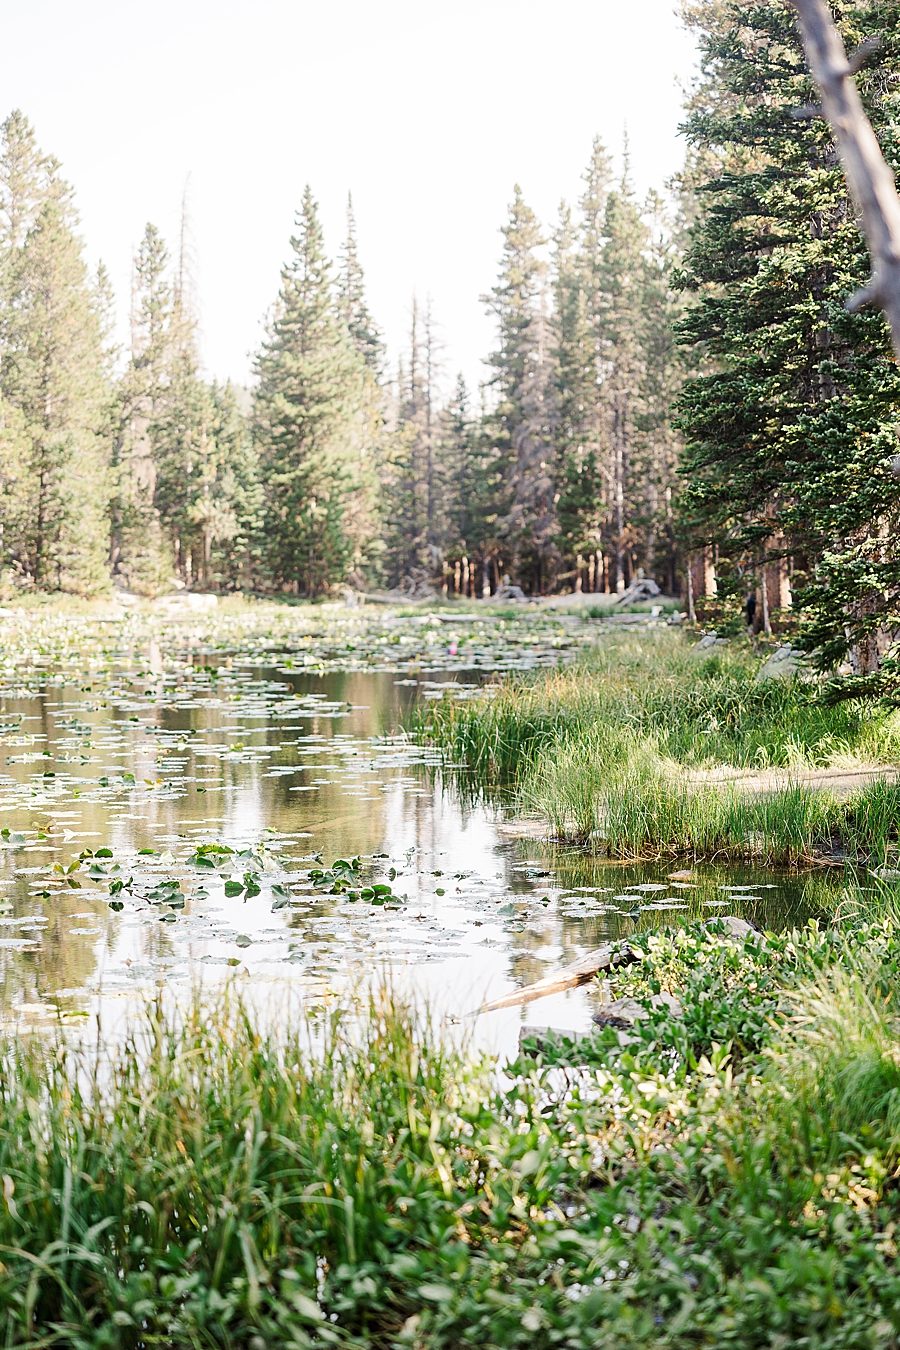 Lilly pad view at the Nymph Lake in the Rocky Mountain National Park by Knoxville Wedding Photographer, Amanda May Photos.